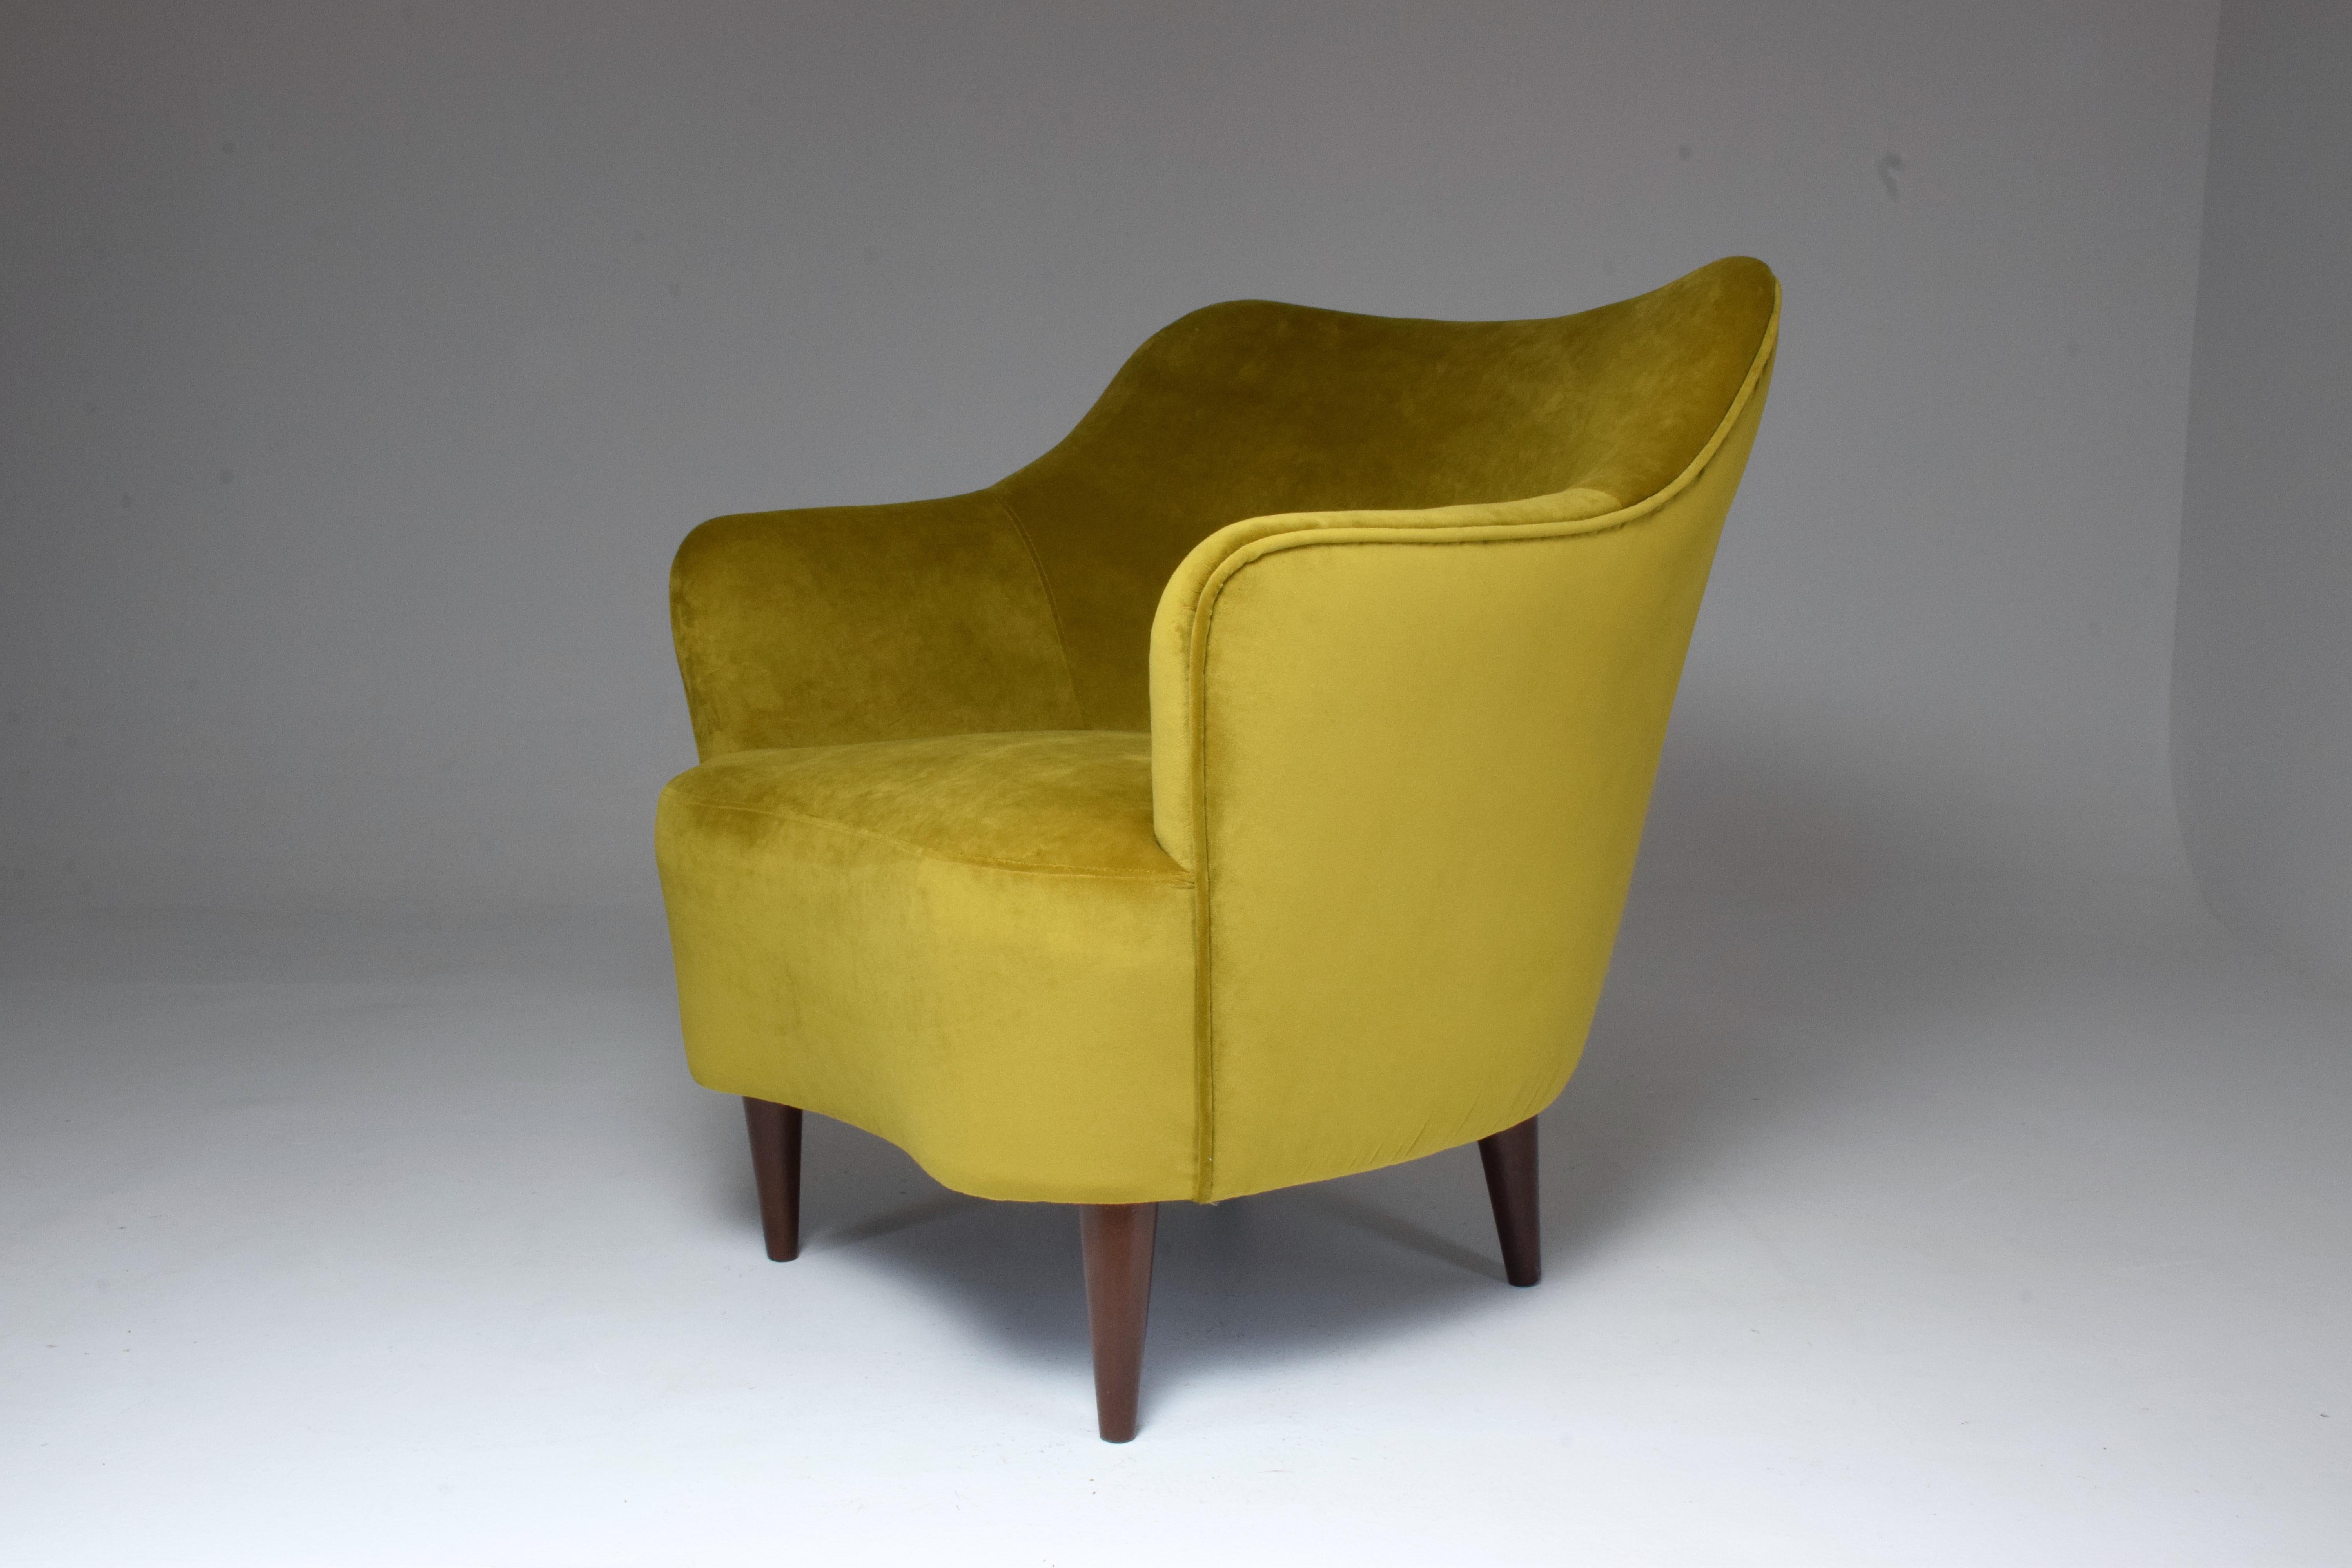 A collectible Italian vintage armchair designed by Gio Ponti for manufacturing company Casa e Giardino in the late 1930s.
In fully restored condition with new yellow velvet upholstery - this model is designed with an integrated cushion.
Italy, circa